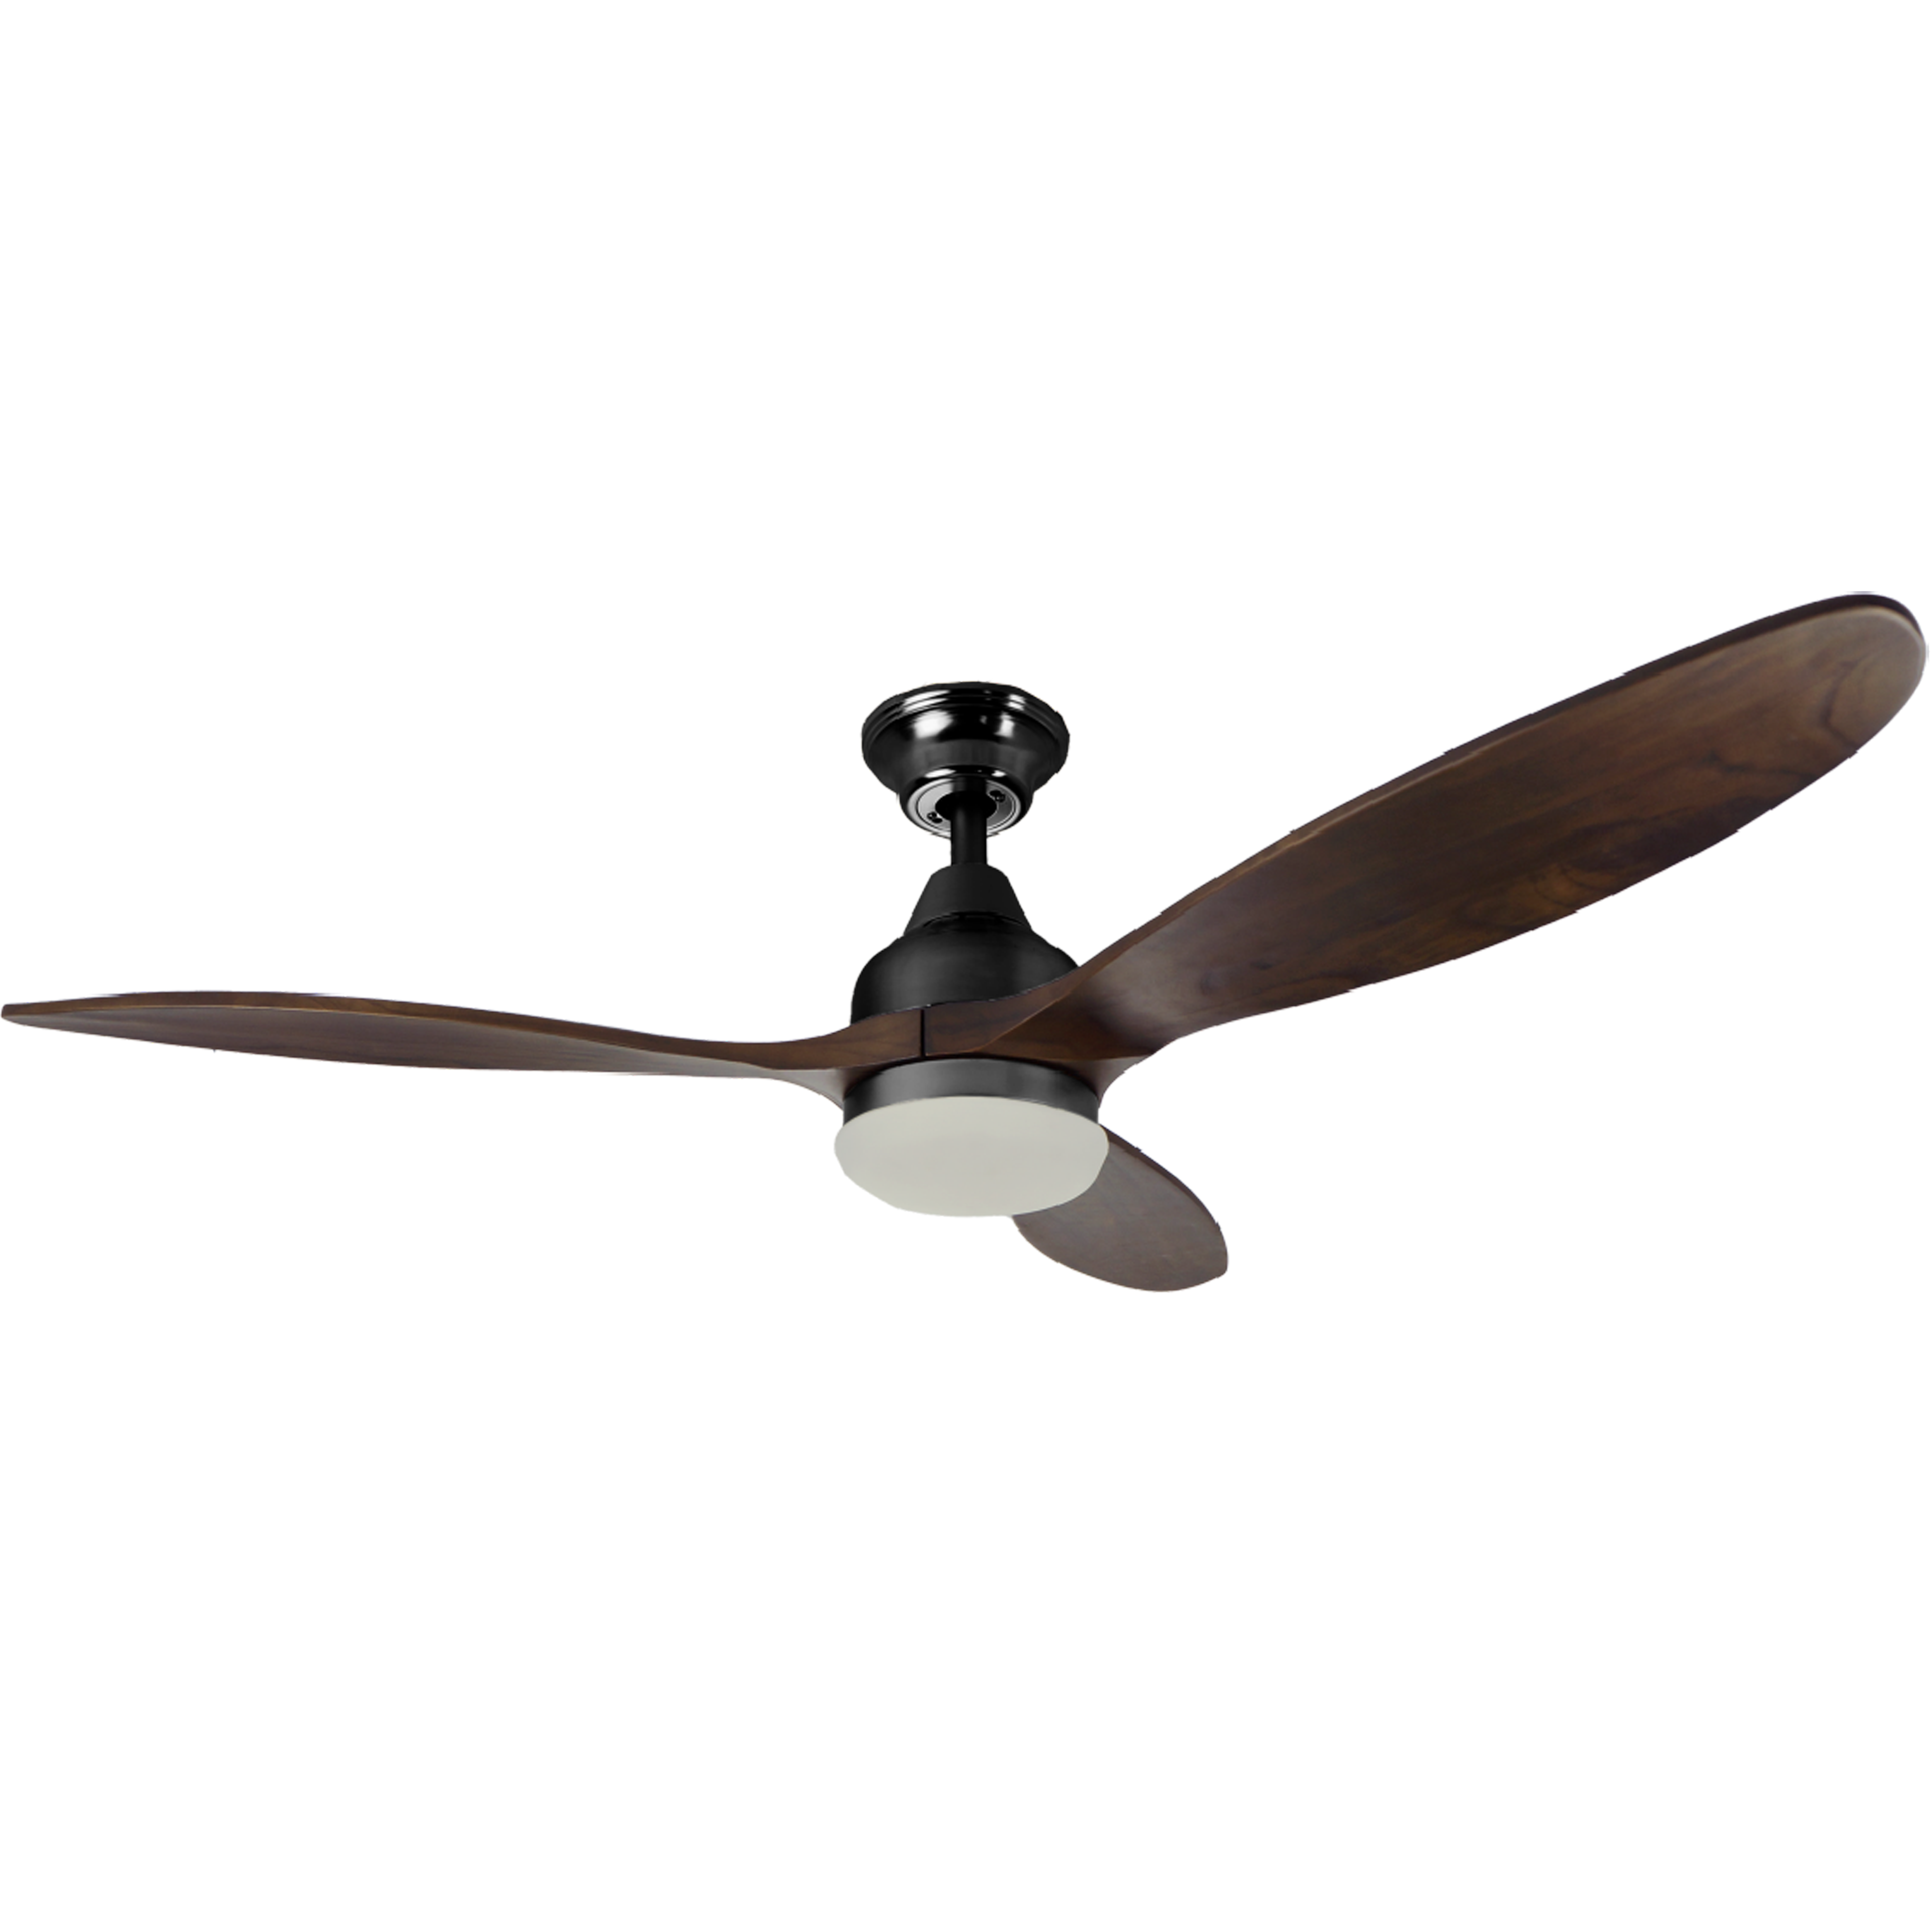 Luxury Remote Control High Speed Solid Wooden Ceiling Fans